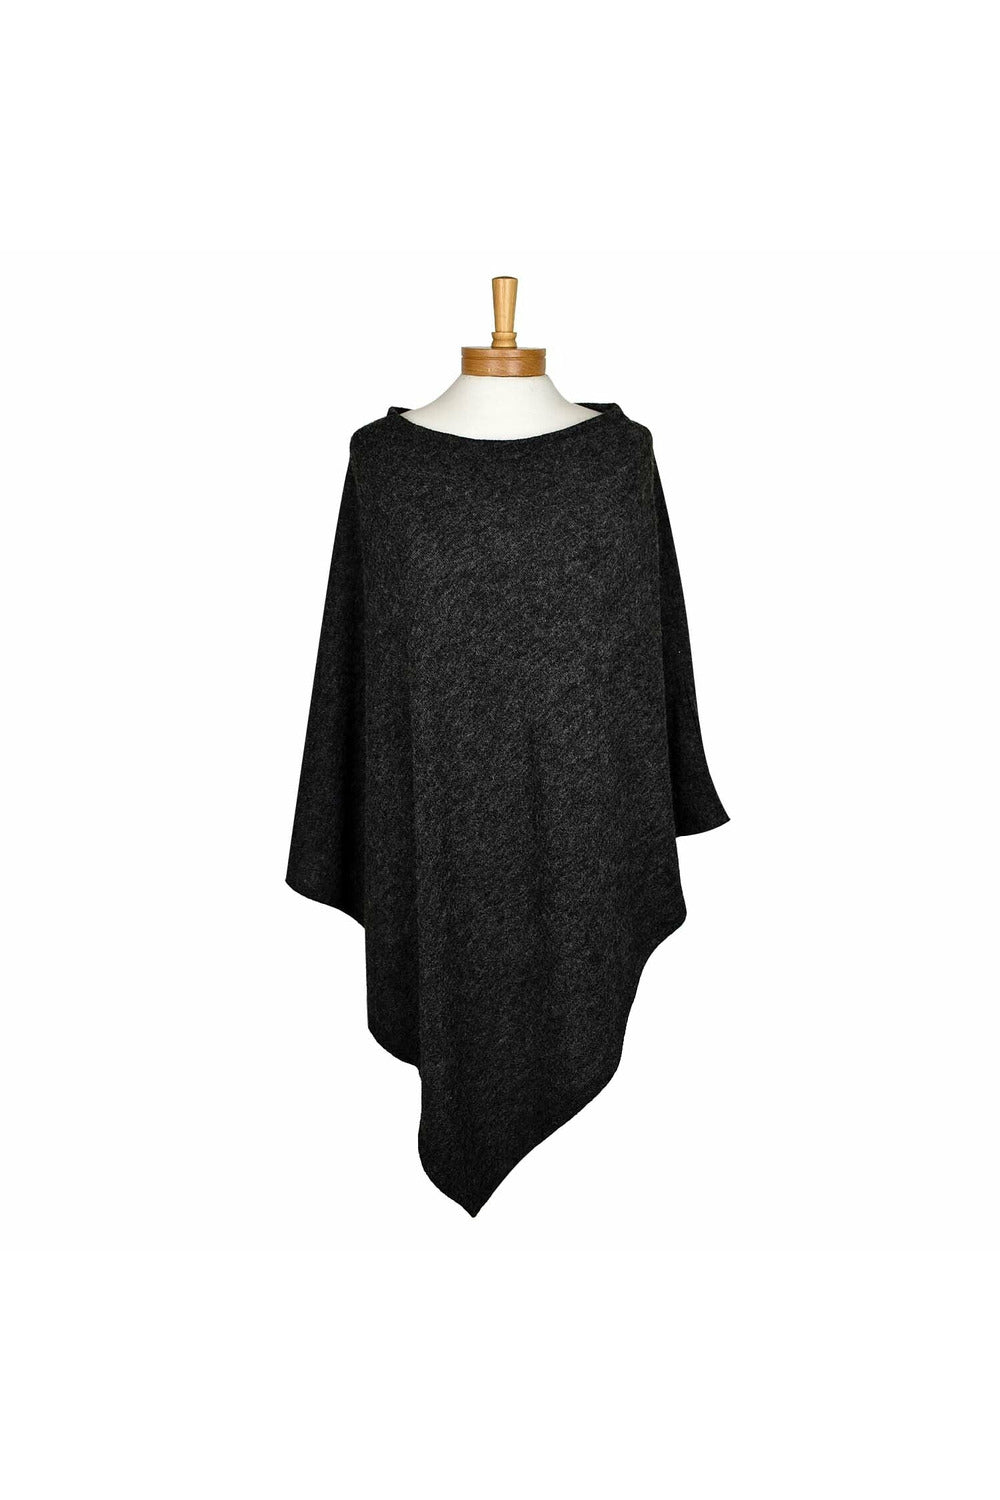 Taylor Hill Charcoal Pearl Poncho